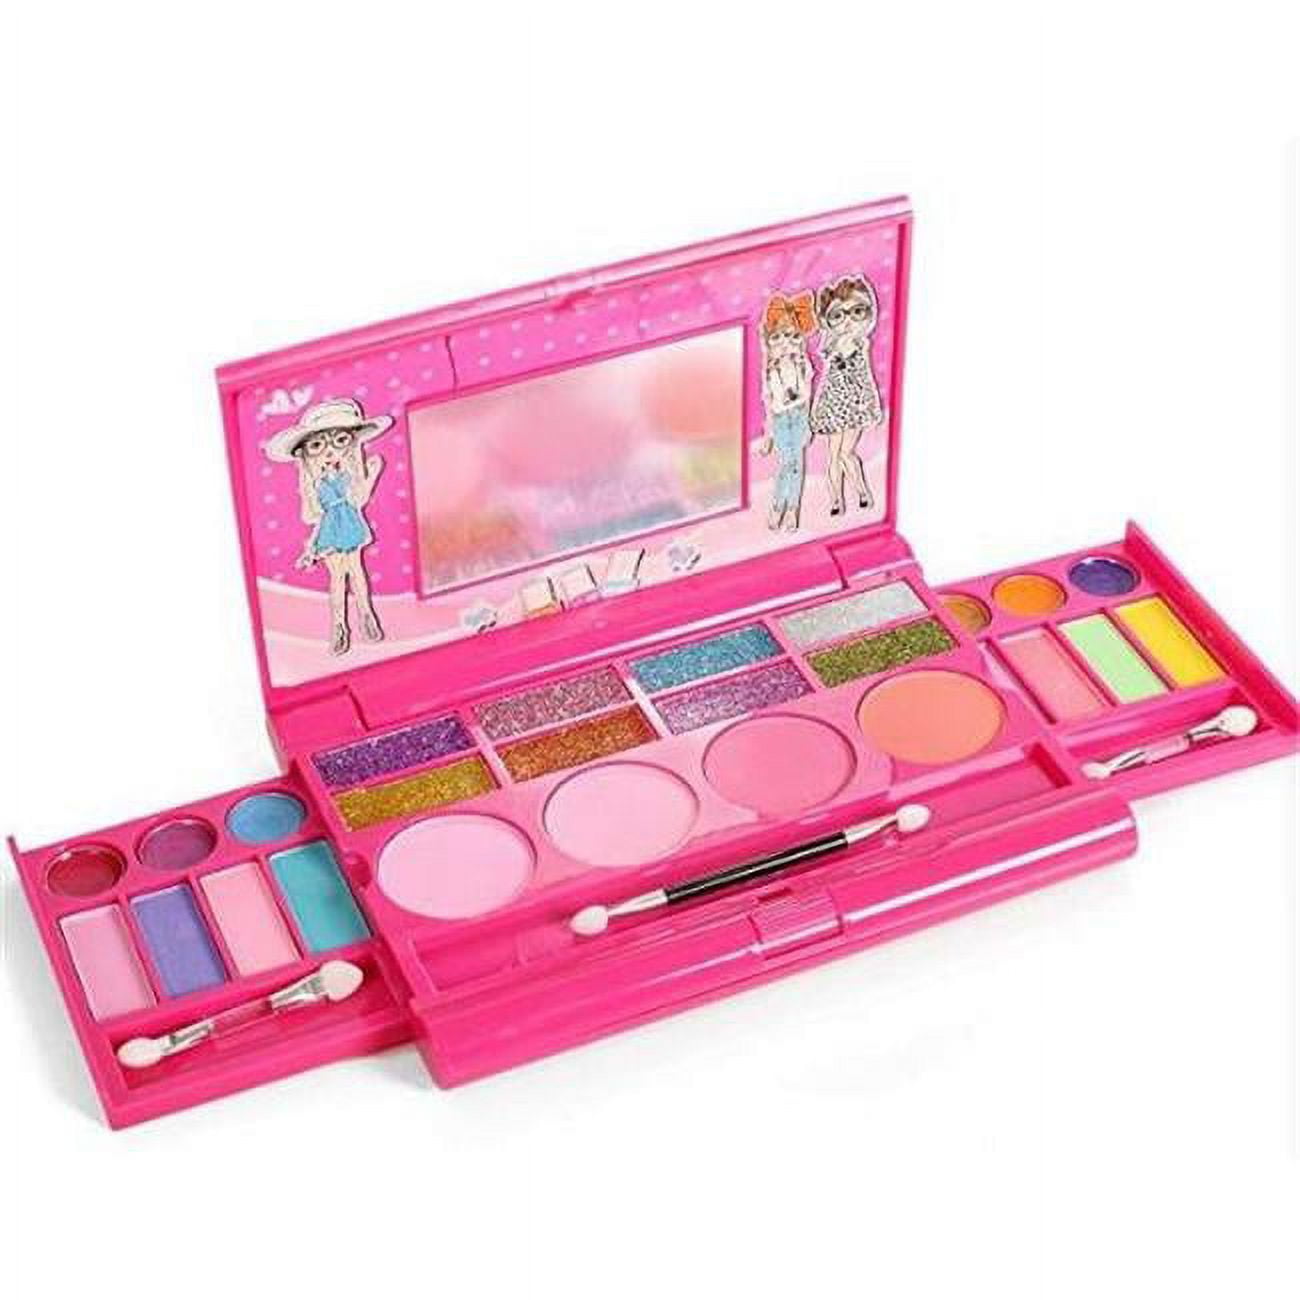 Psmp102 Princess Girls Deluxe Makeup Palette With Mirror - All-in-one